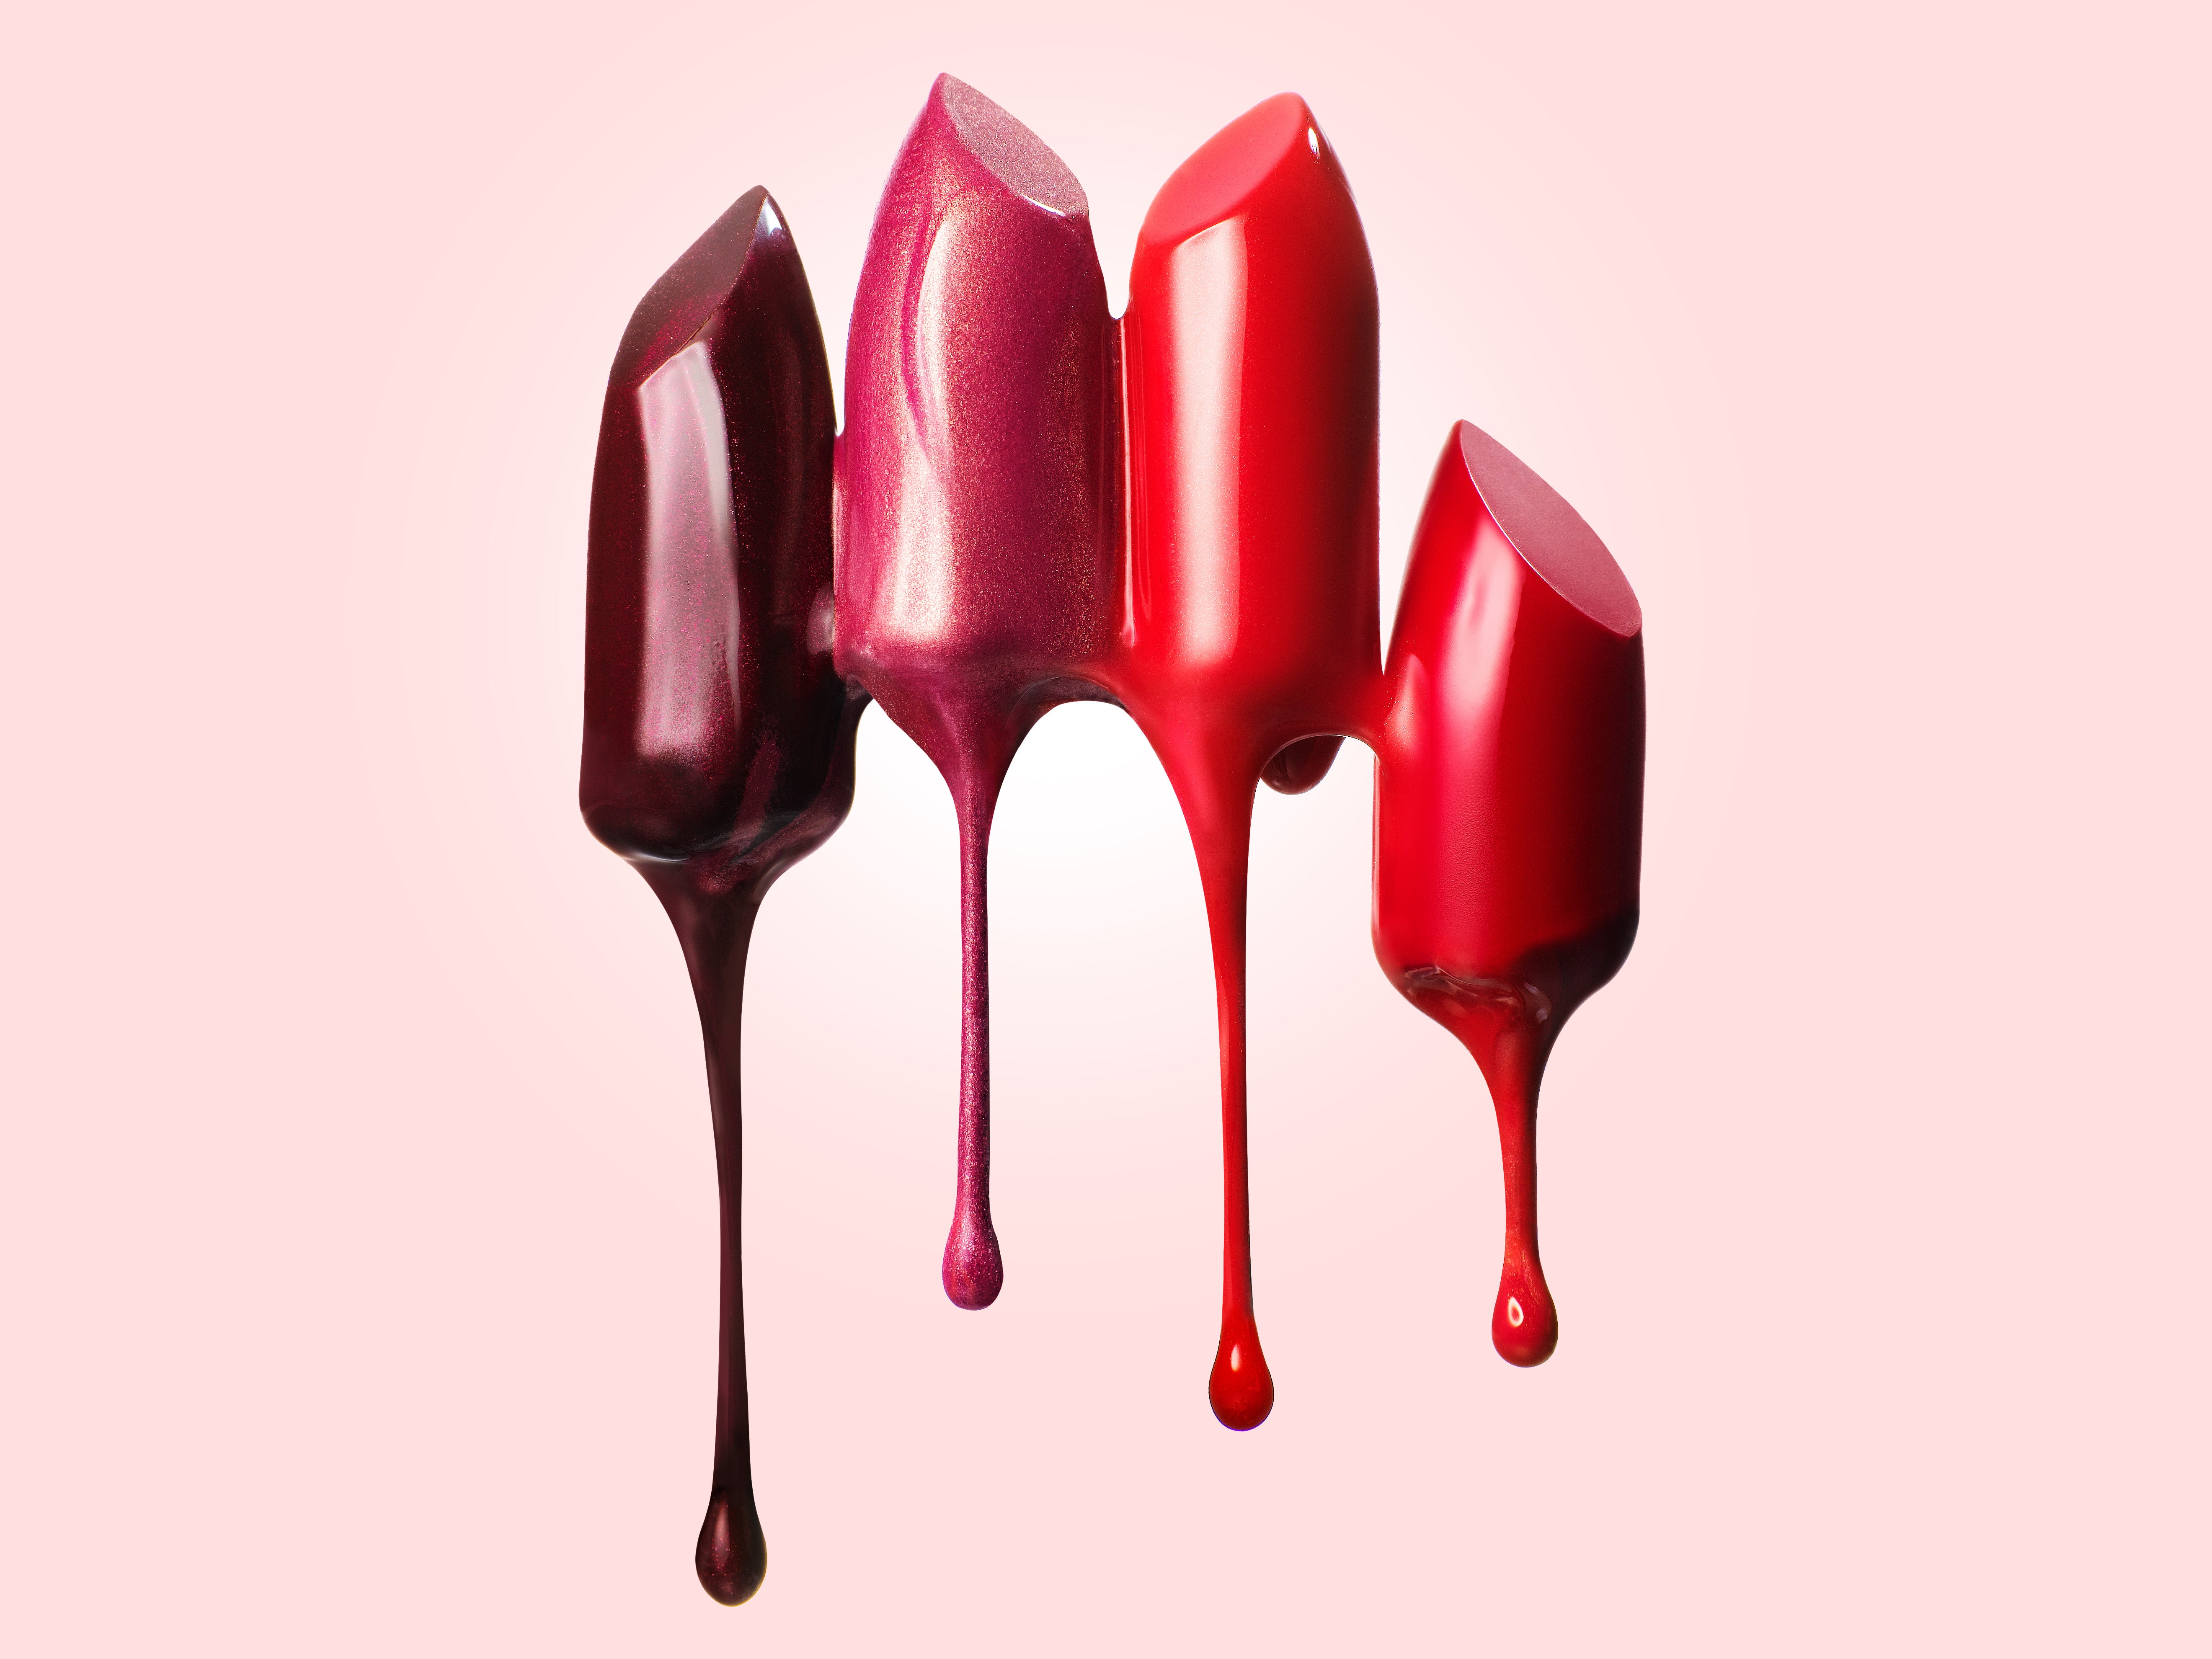 How to Fix Lipstick That Has Been Broken, Melted, or Generally Destroyed